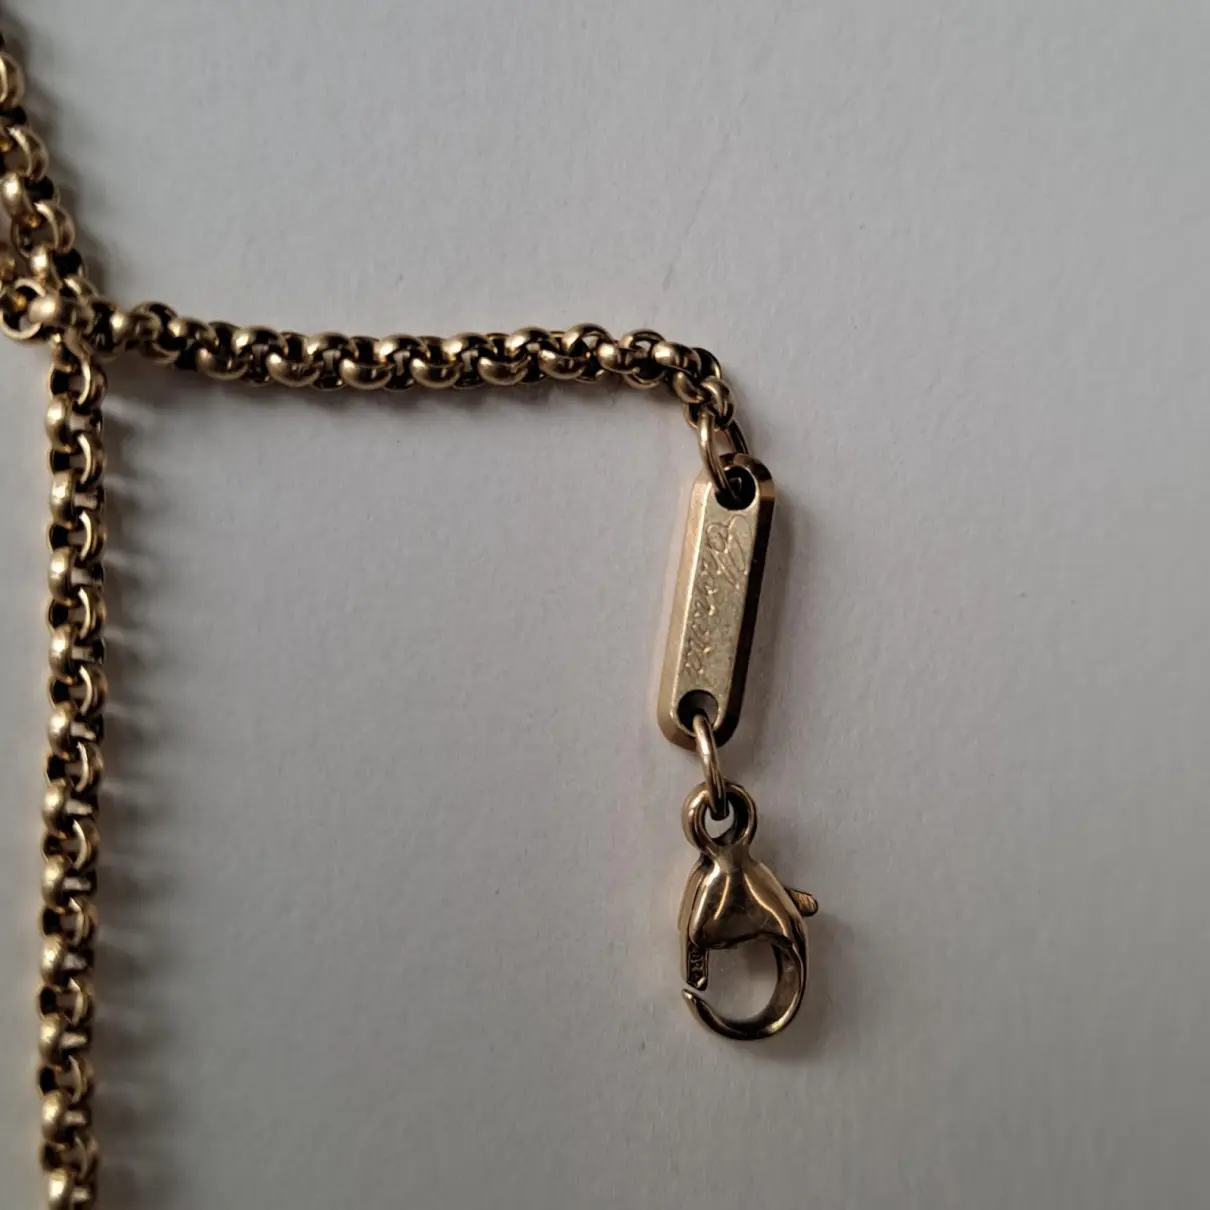 Yellow gold necklace Chopard